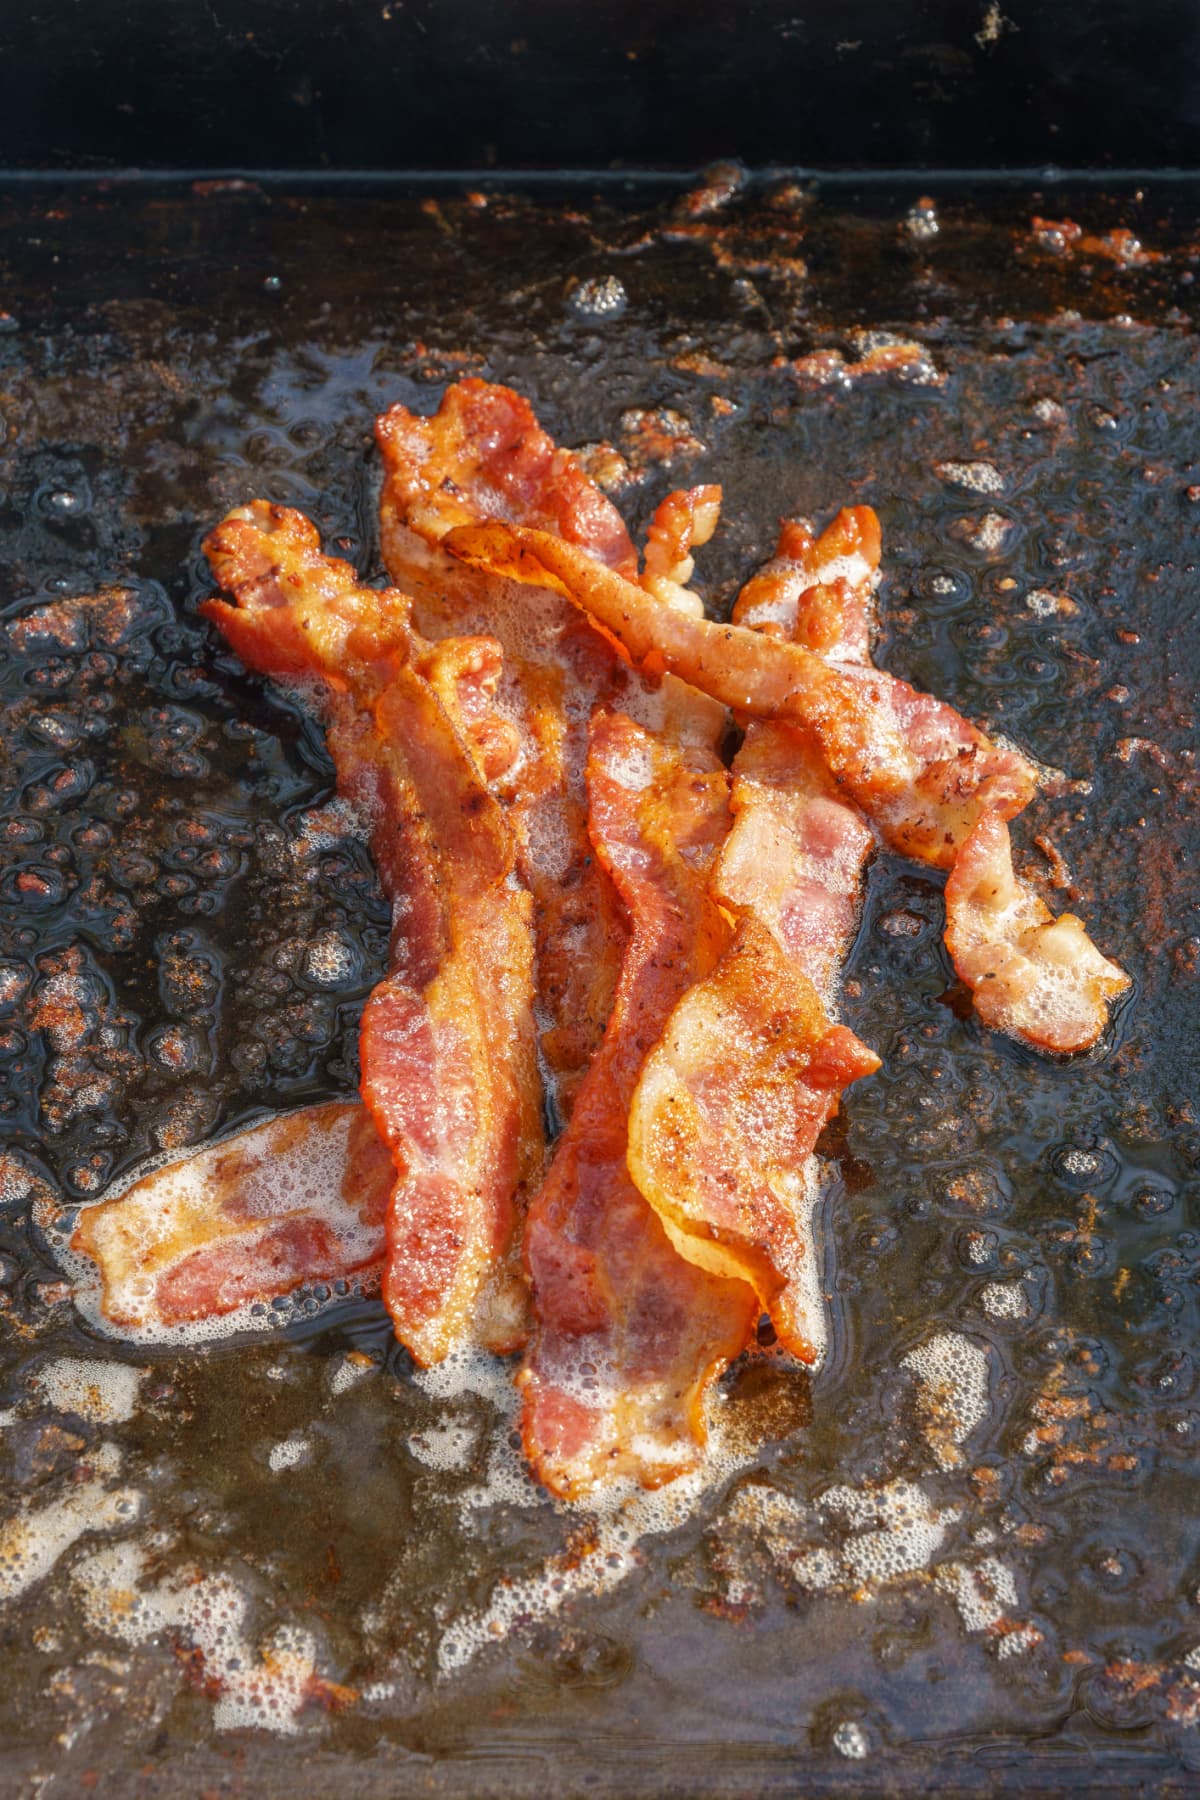 Bacon frying in grease on an outdoor camping grill. The pieces are piled together in the center.